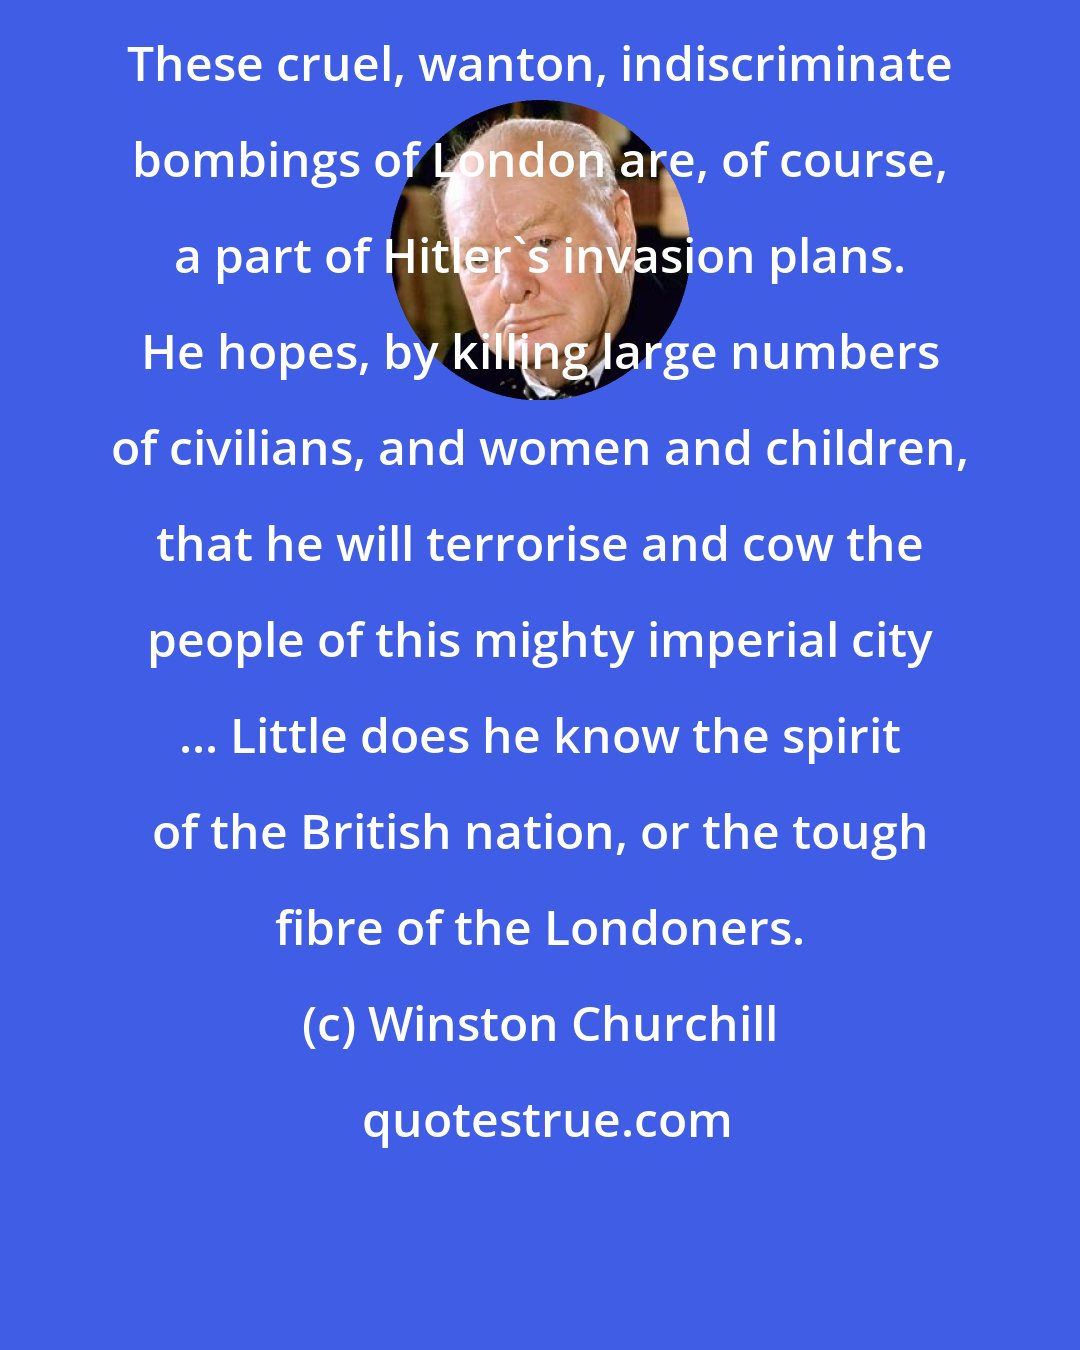 Winston Churchill: These cruel, wanton, indiscriminate bombings of London are, of course, a part of Hitler's invasion plans. He hopes, by killing large numbers of civilians, and women and children, that he will terrorise and cow the people of this mighty imperial city ... Little does he know the spirit of the British nation, or the tough fibre of the Londoners.